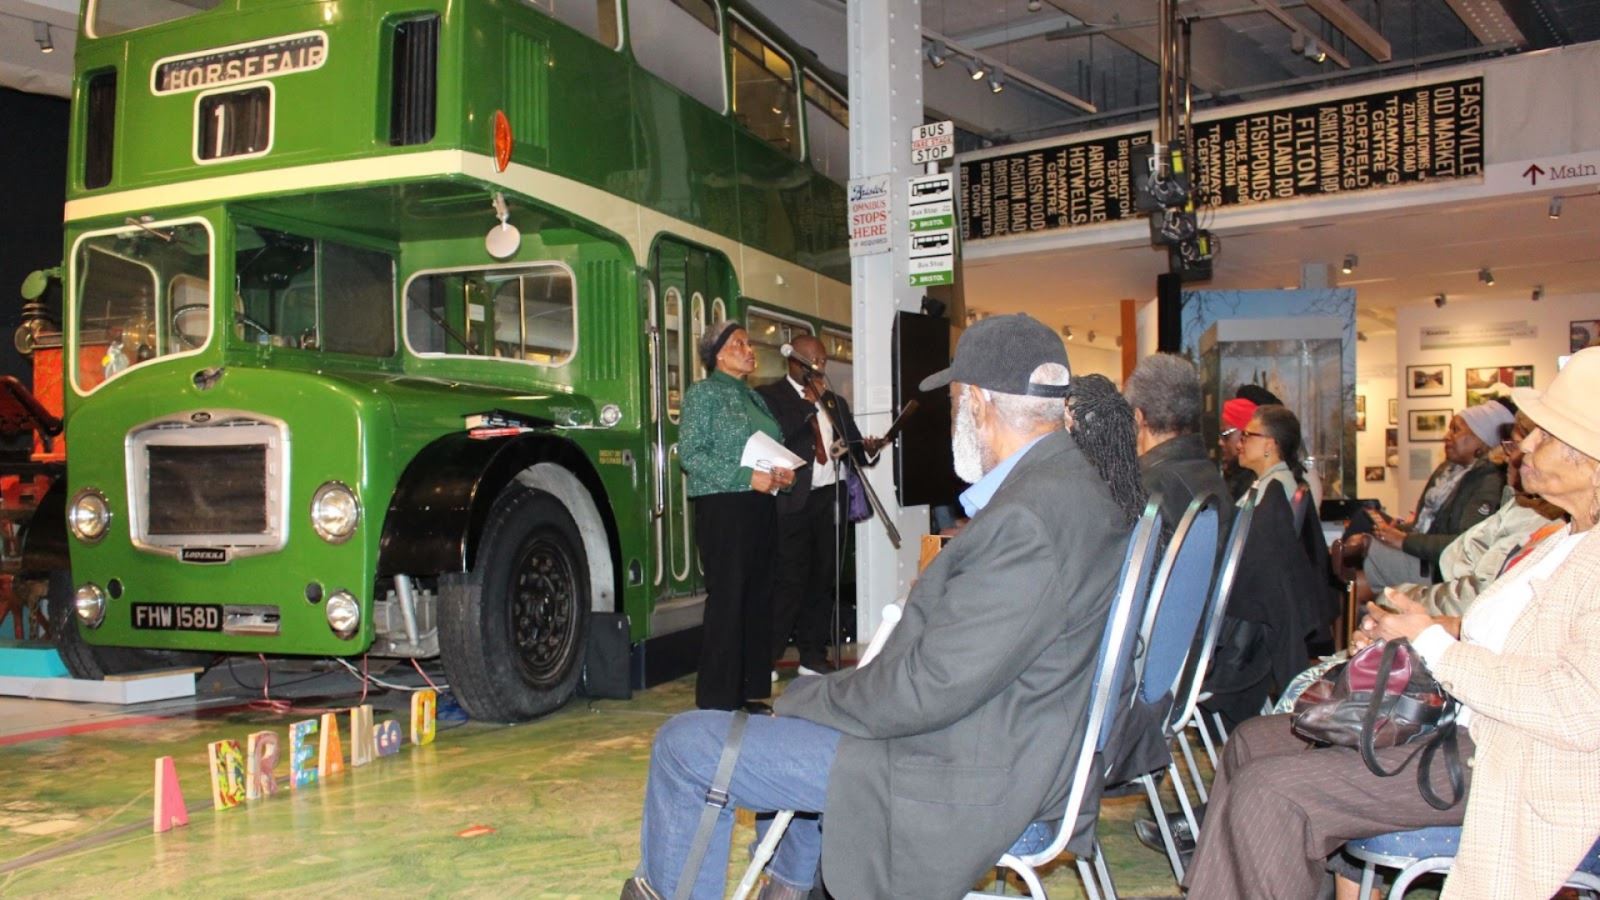 Community representatives from across Bristol met at M Shed on Friday (28 April) to mark the 60th anniversary of the beginning of the Bristol Bus Boycott. The event included a speech by Mayor Marvin Rees.